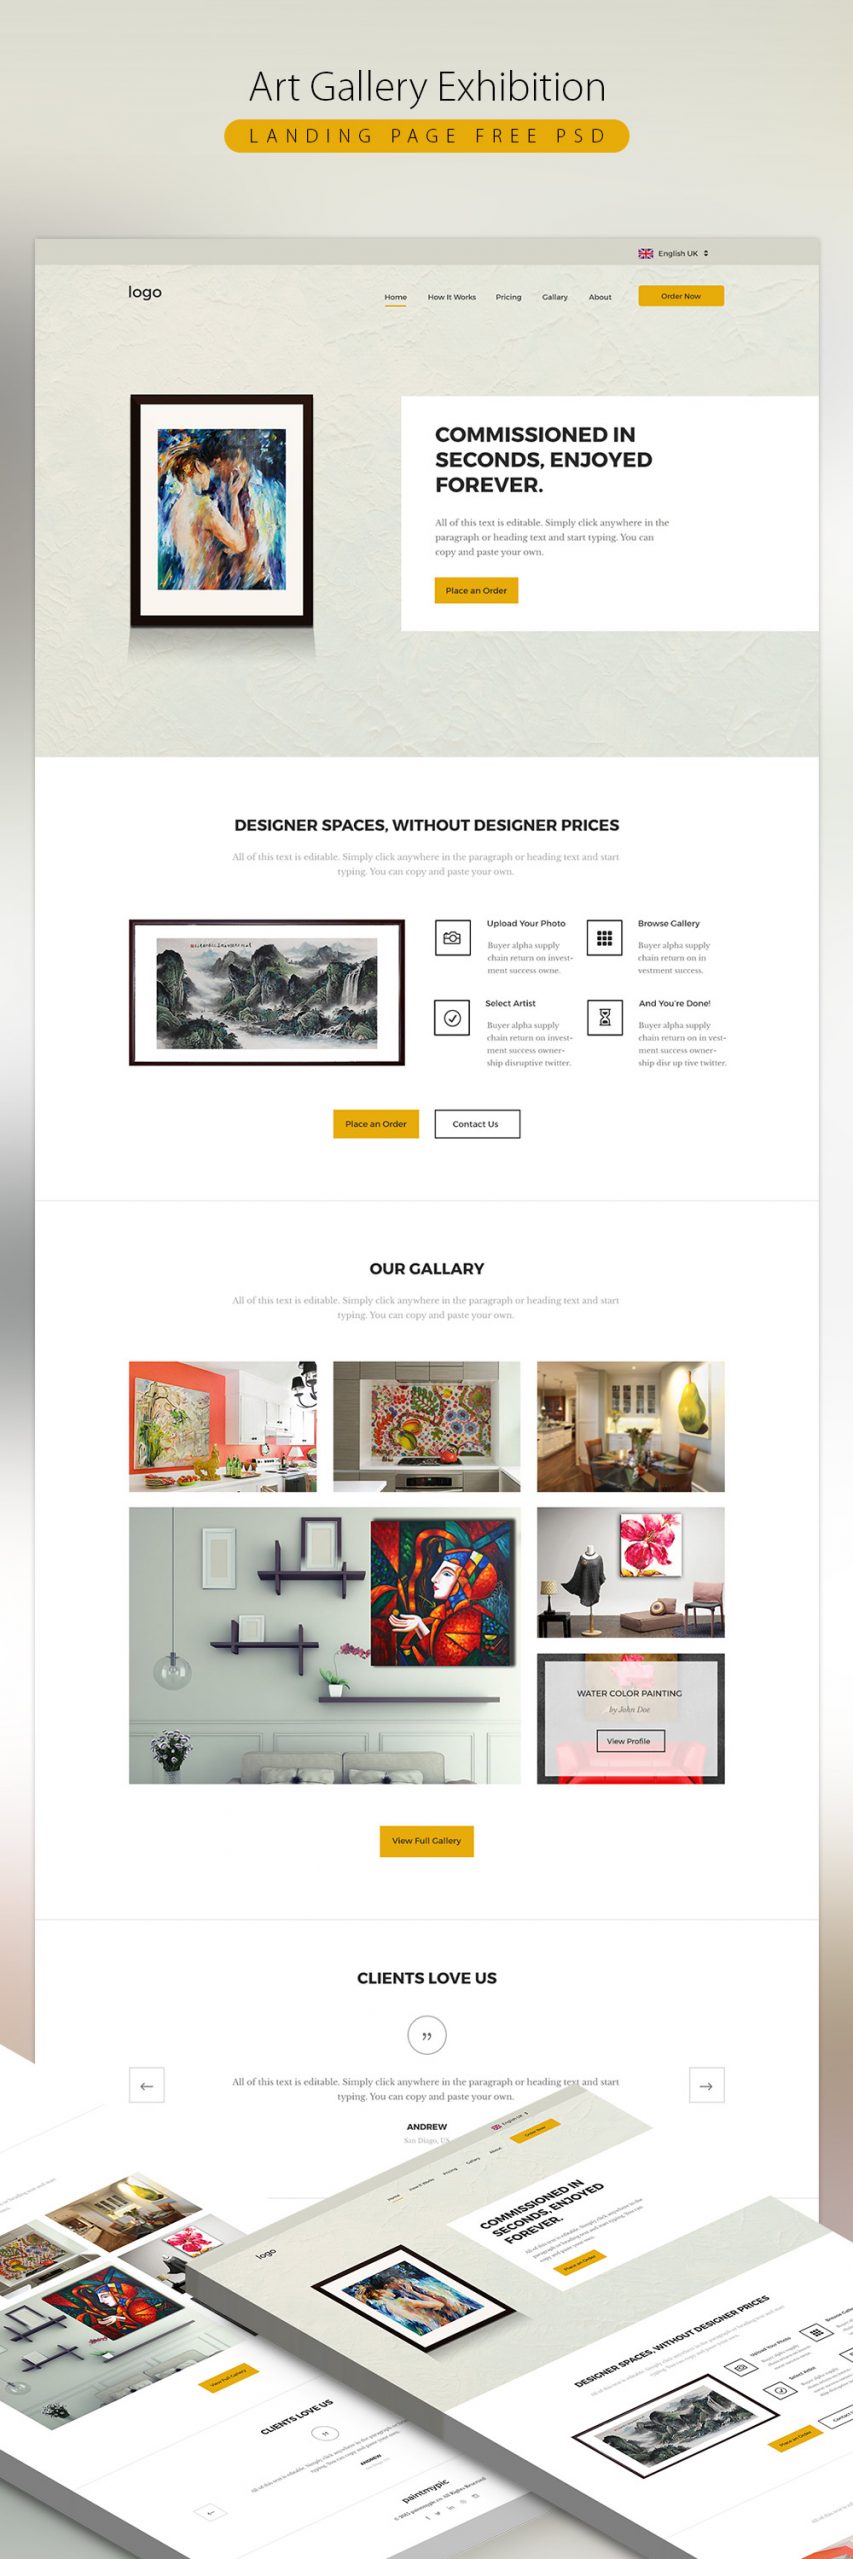 Art Gallery Exhibition Landing Page